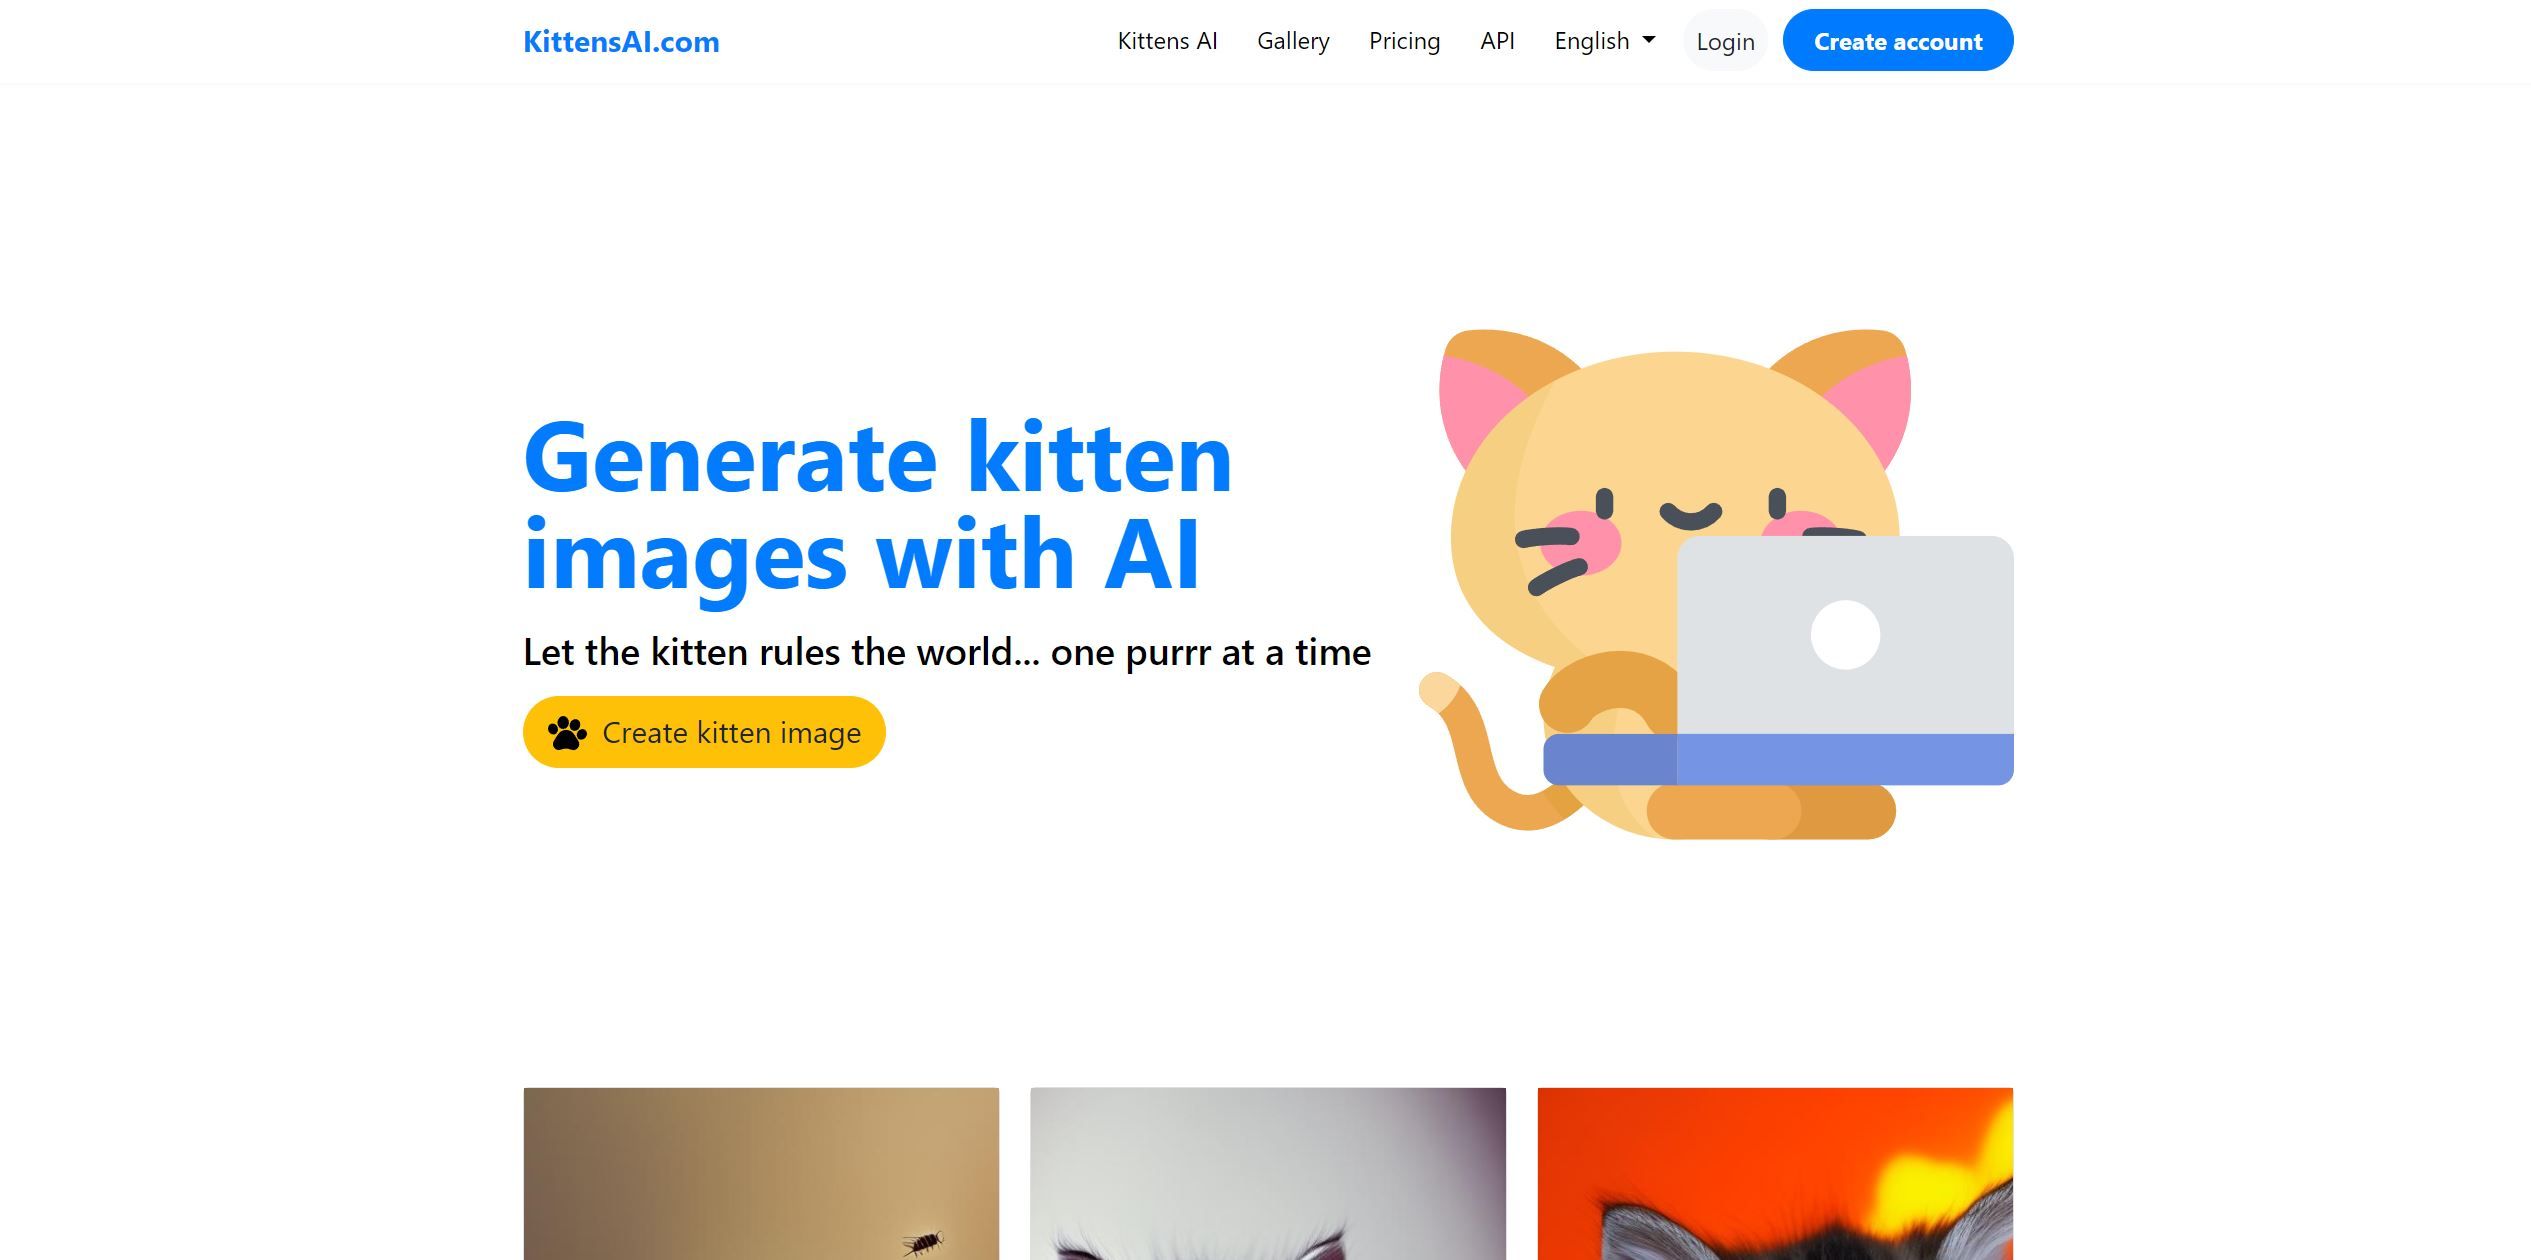 KittensAIAI program creates adorable kitten images in a simple and